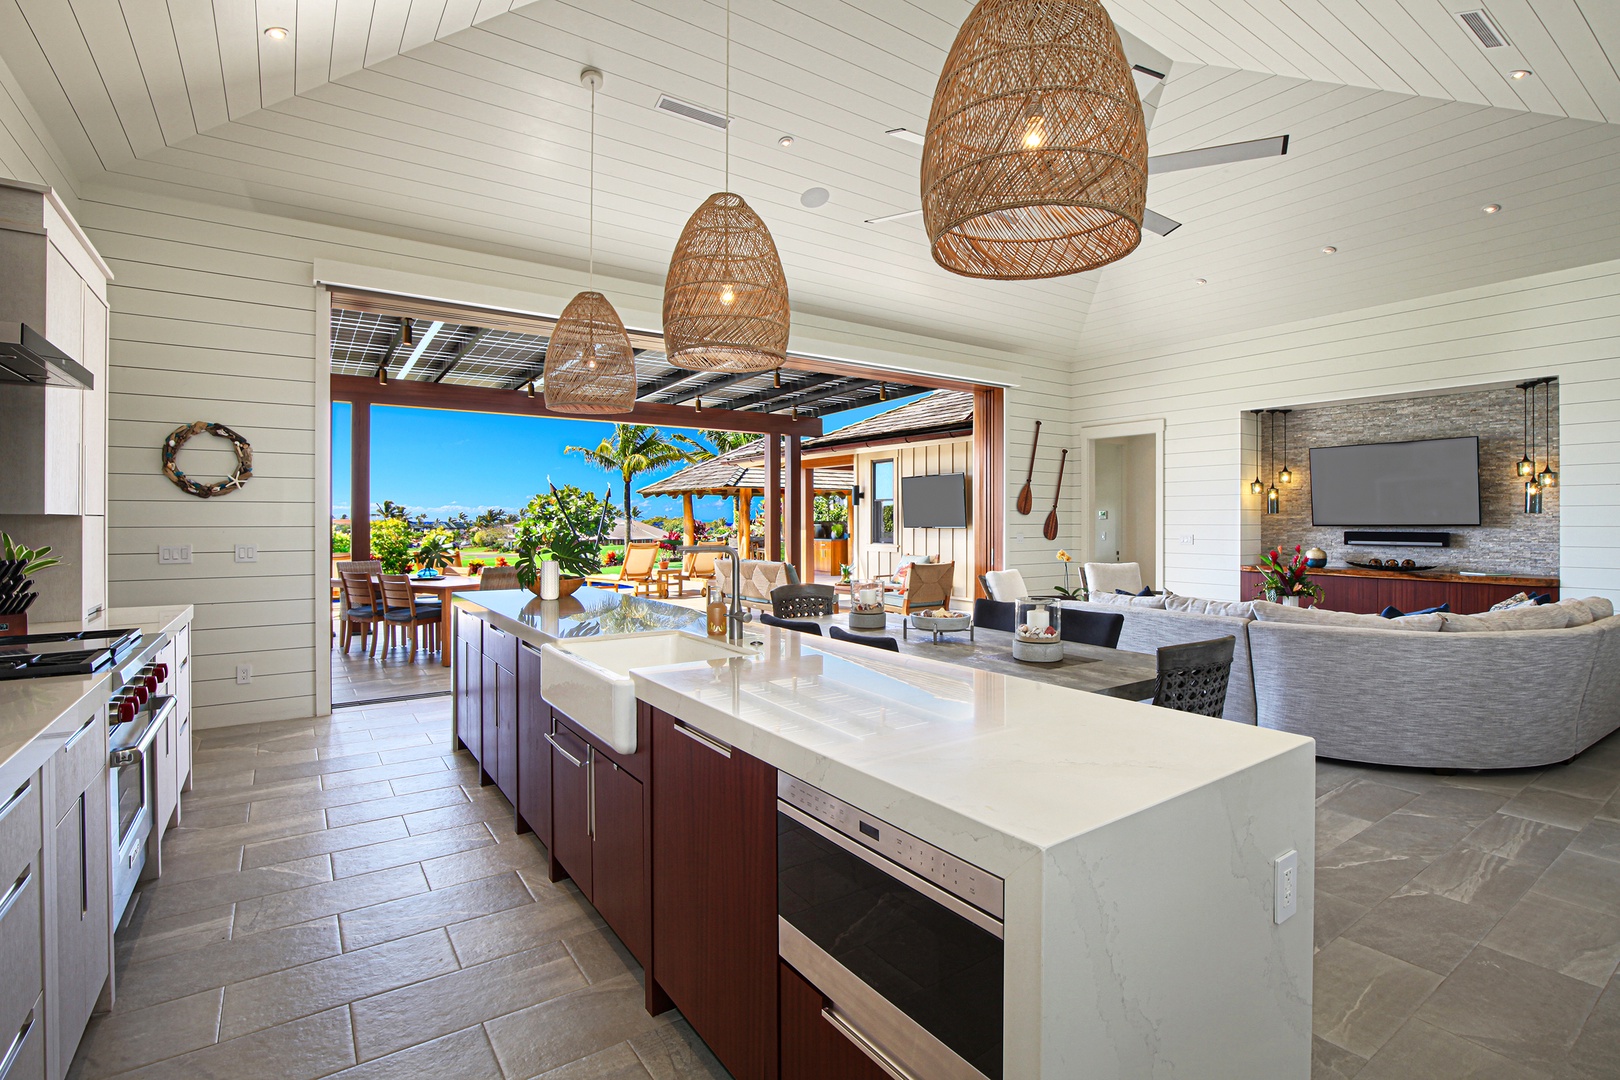 Koloa Vacation Rentals, Hale Mala Ulu - Open kitchen where to cook all your favorite meals